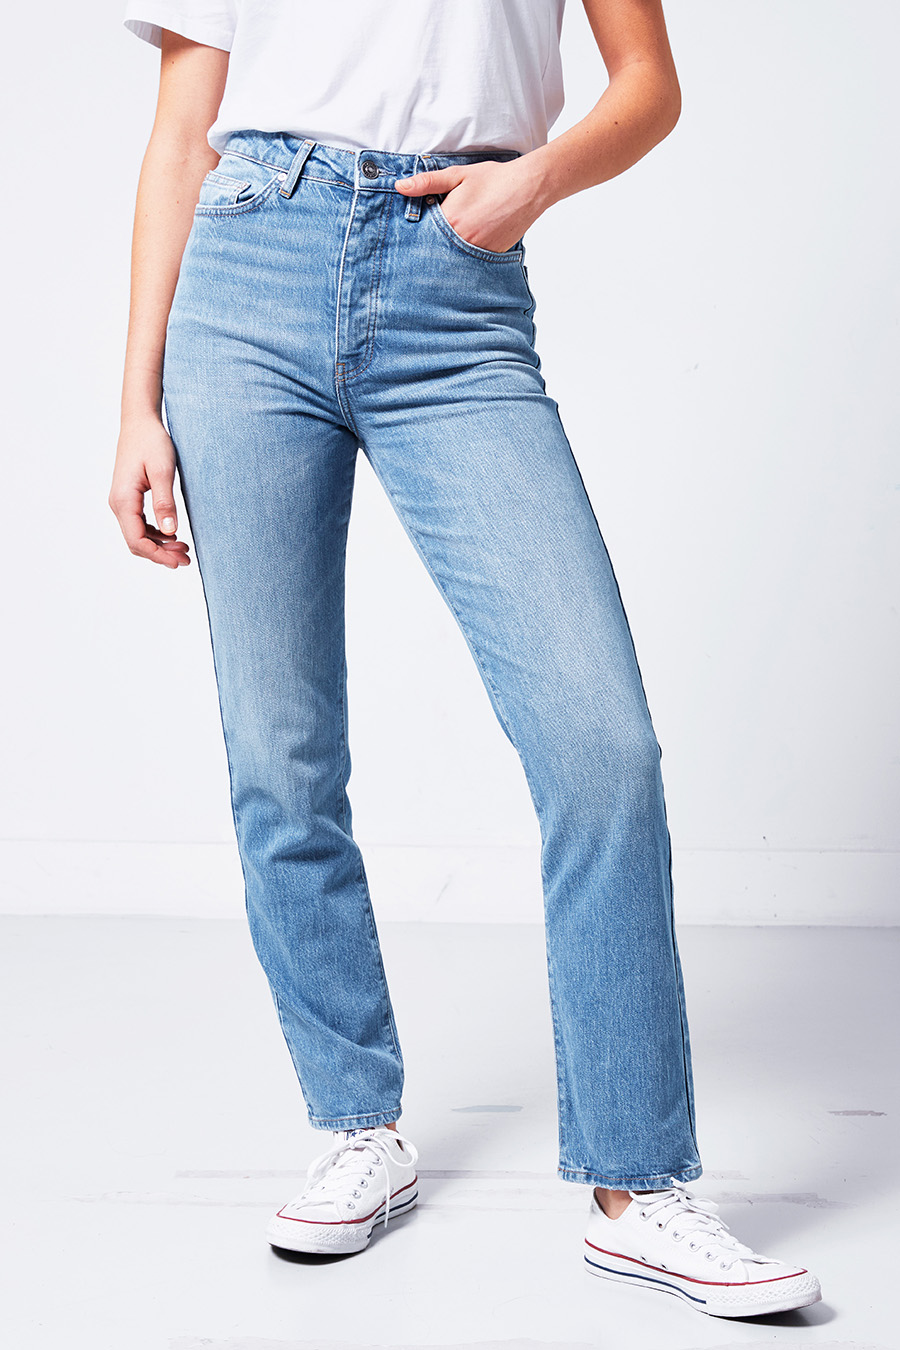 Women's jeans fit guide | America Today